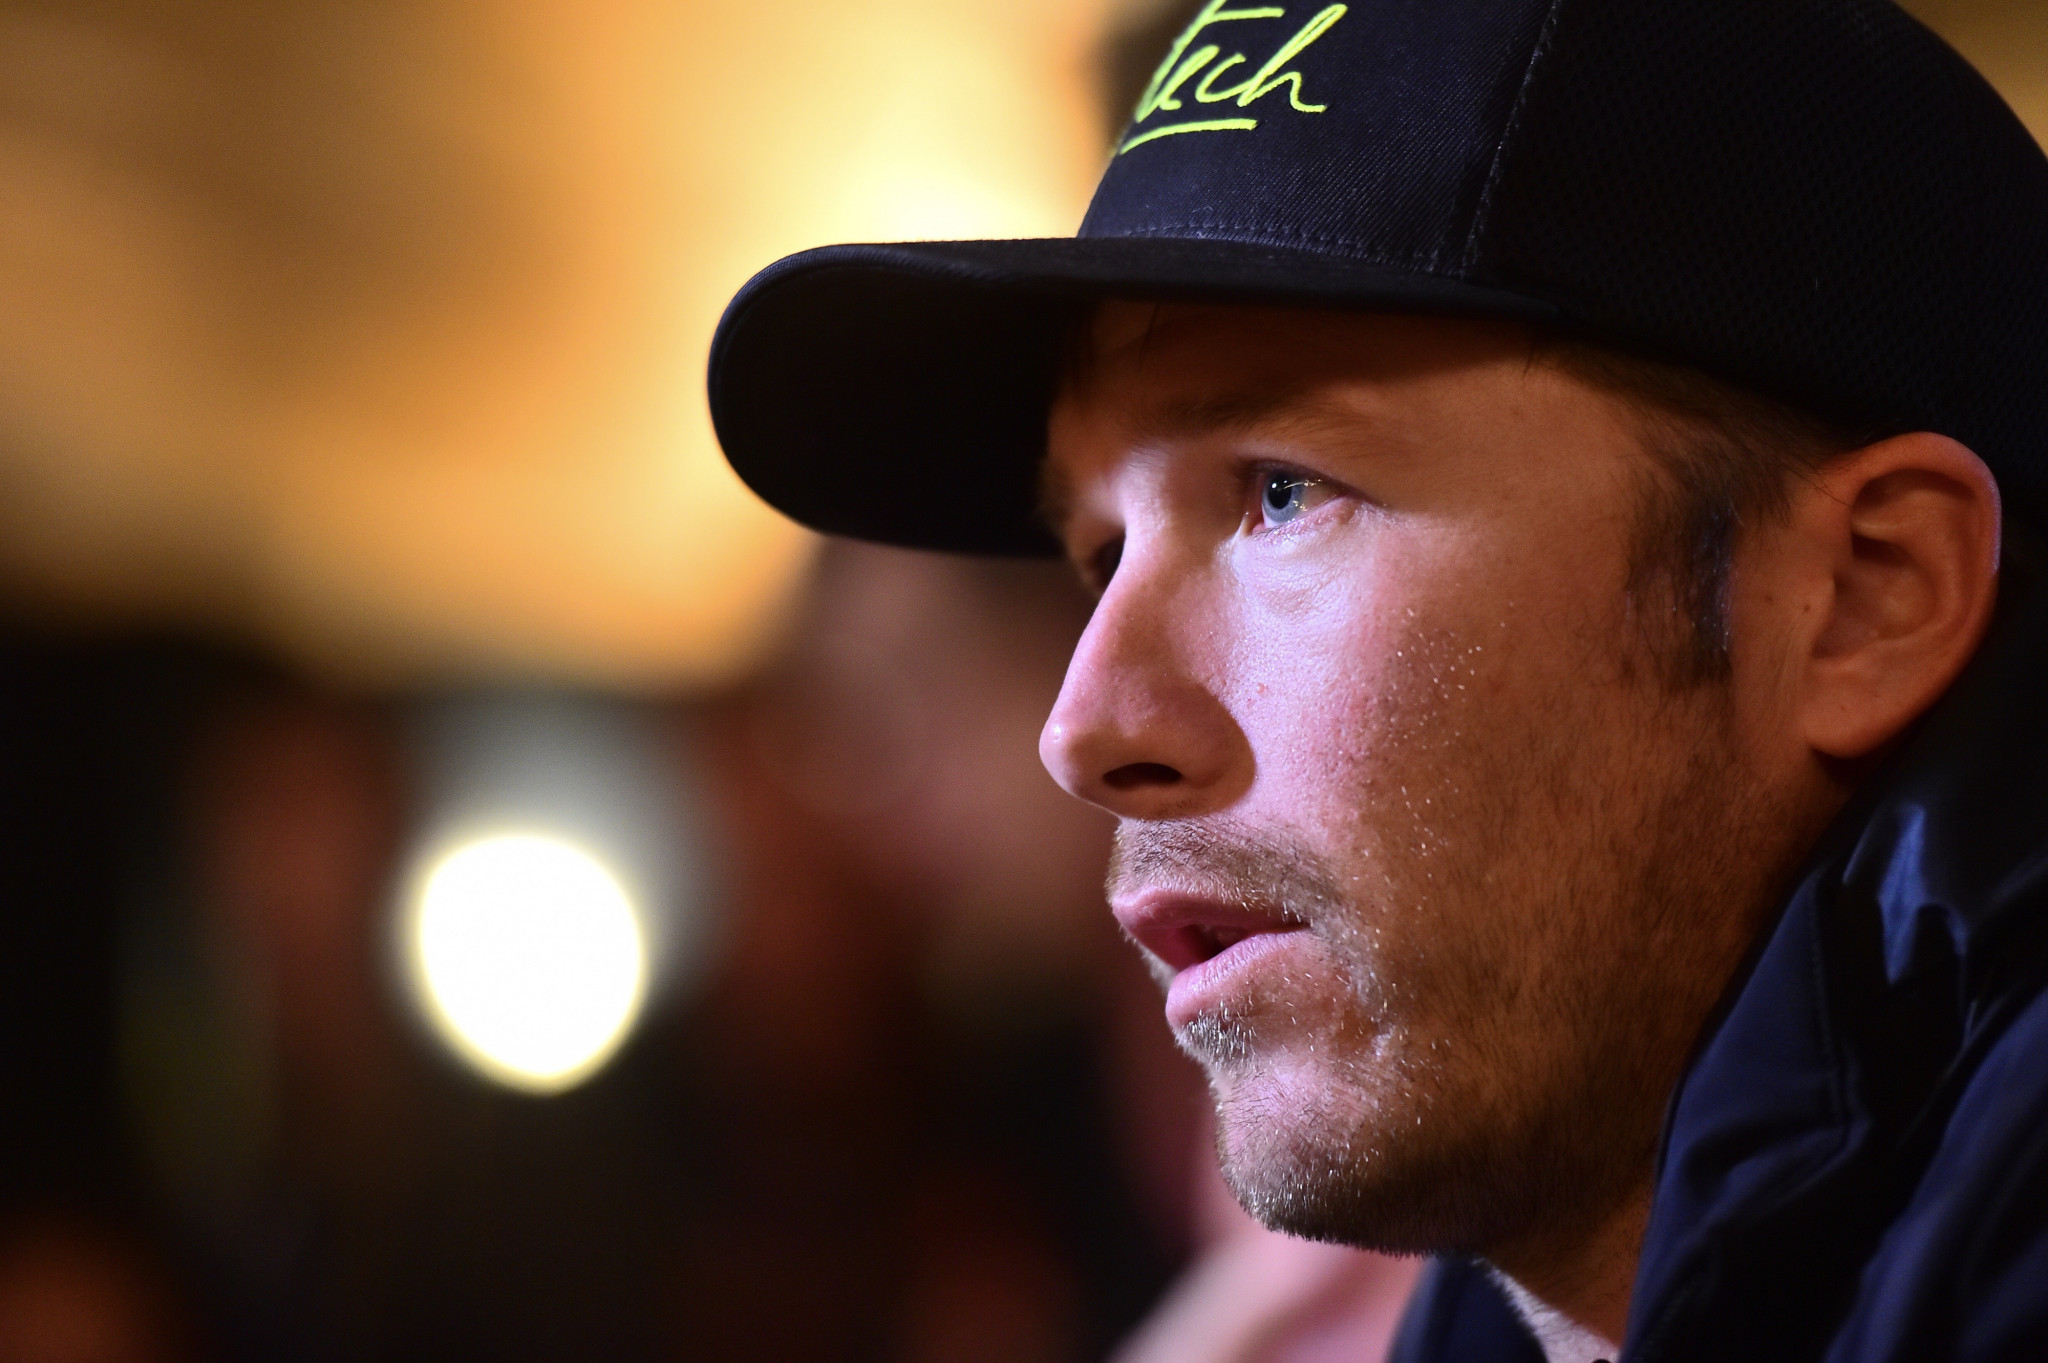 Bode Miller's 19-month-old daughter has died after drowning in a pool ©Getty Images